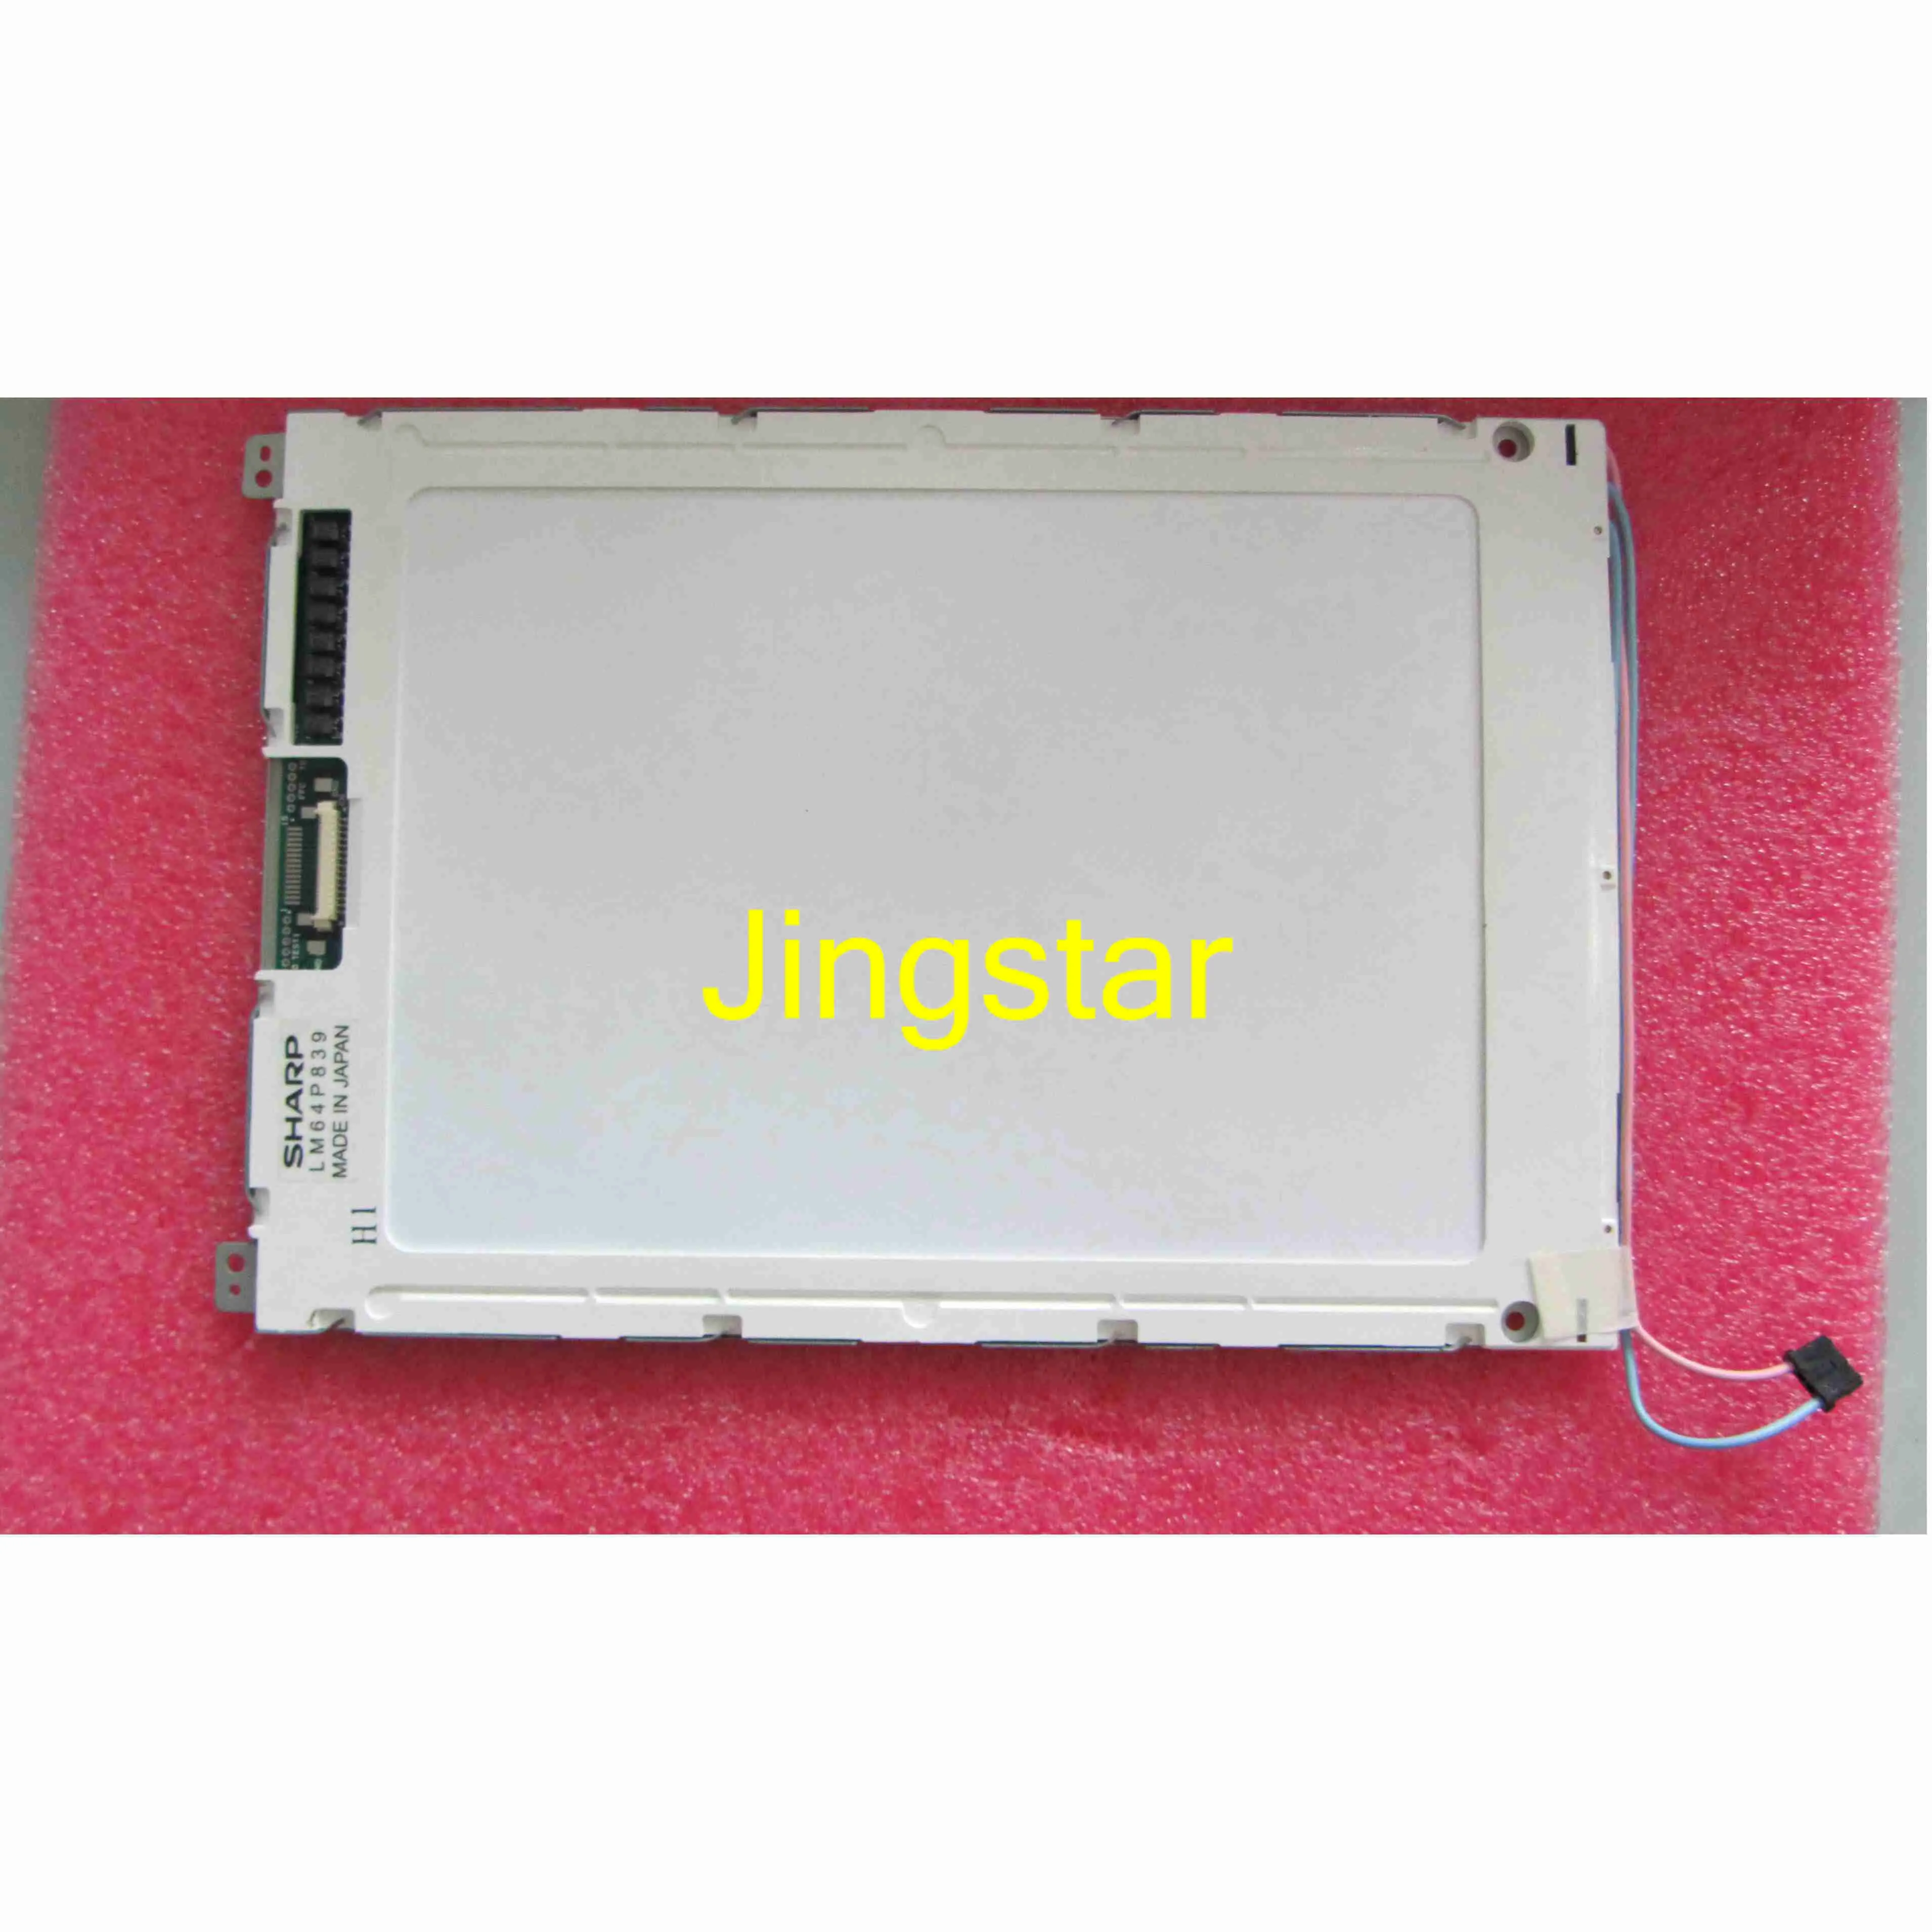 LM64P839 professional Industrial LCD Modules sales with tested ok and warranty